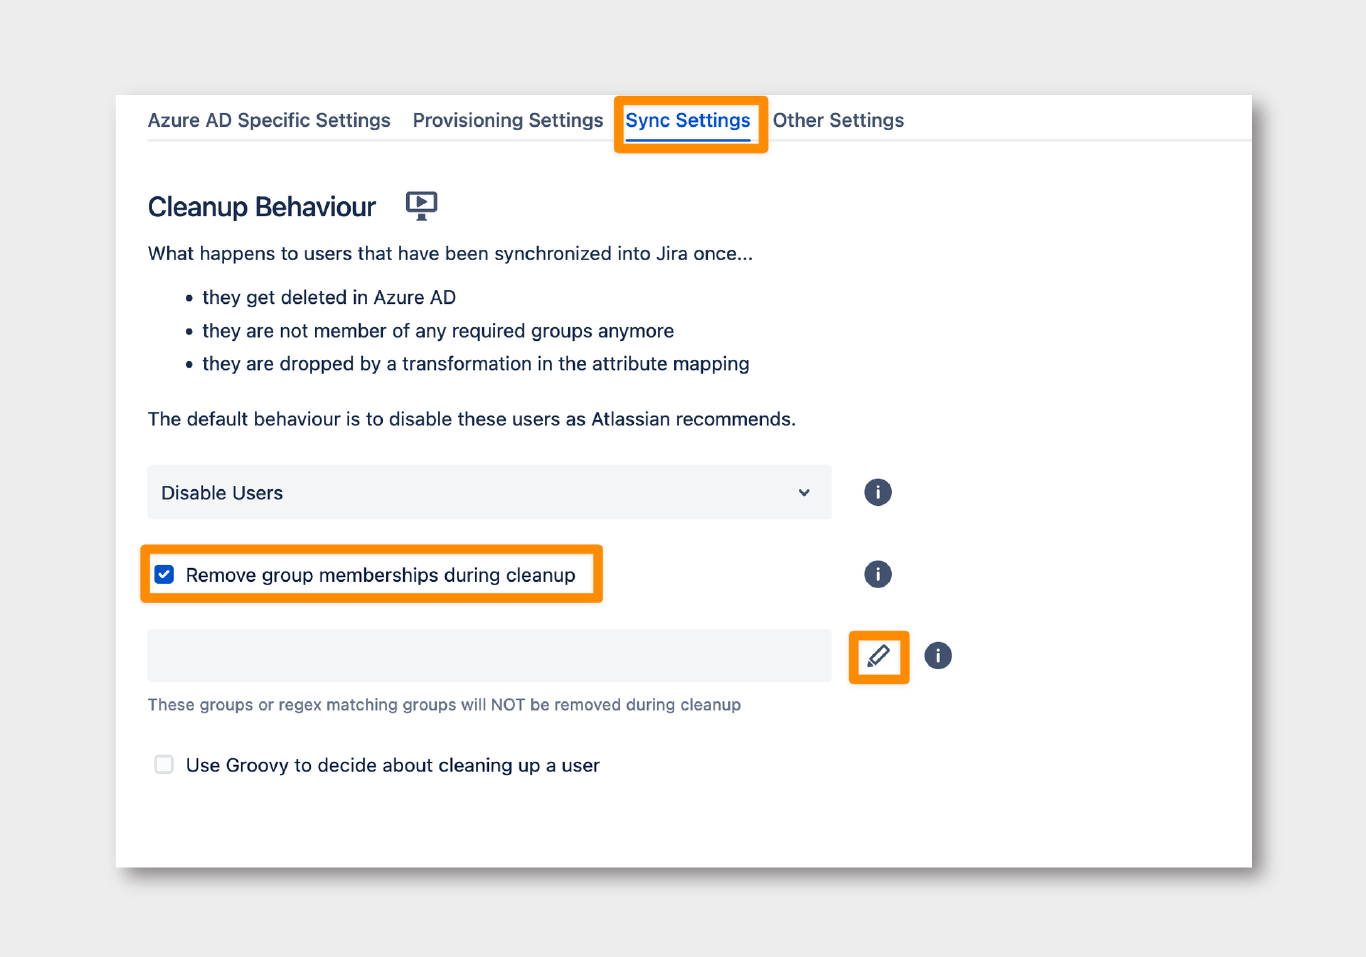 Sync settings - exclusionary group for offboarding